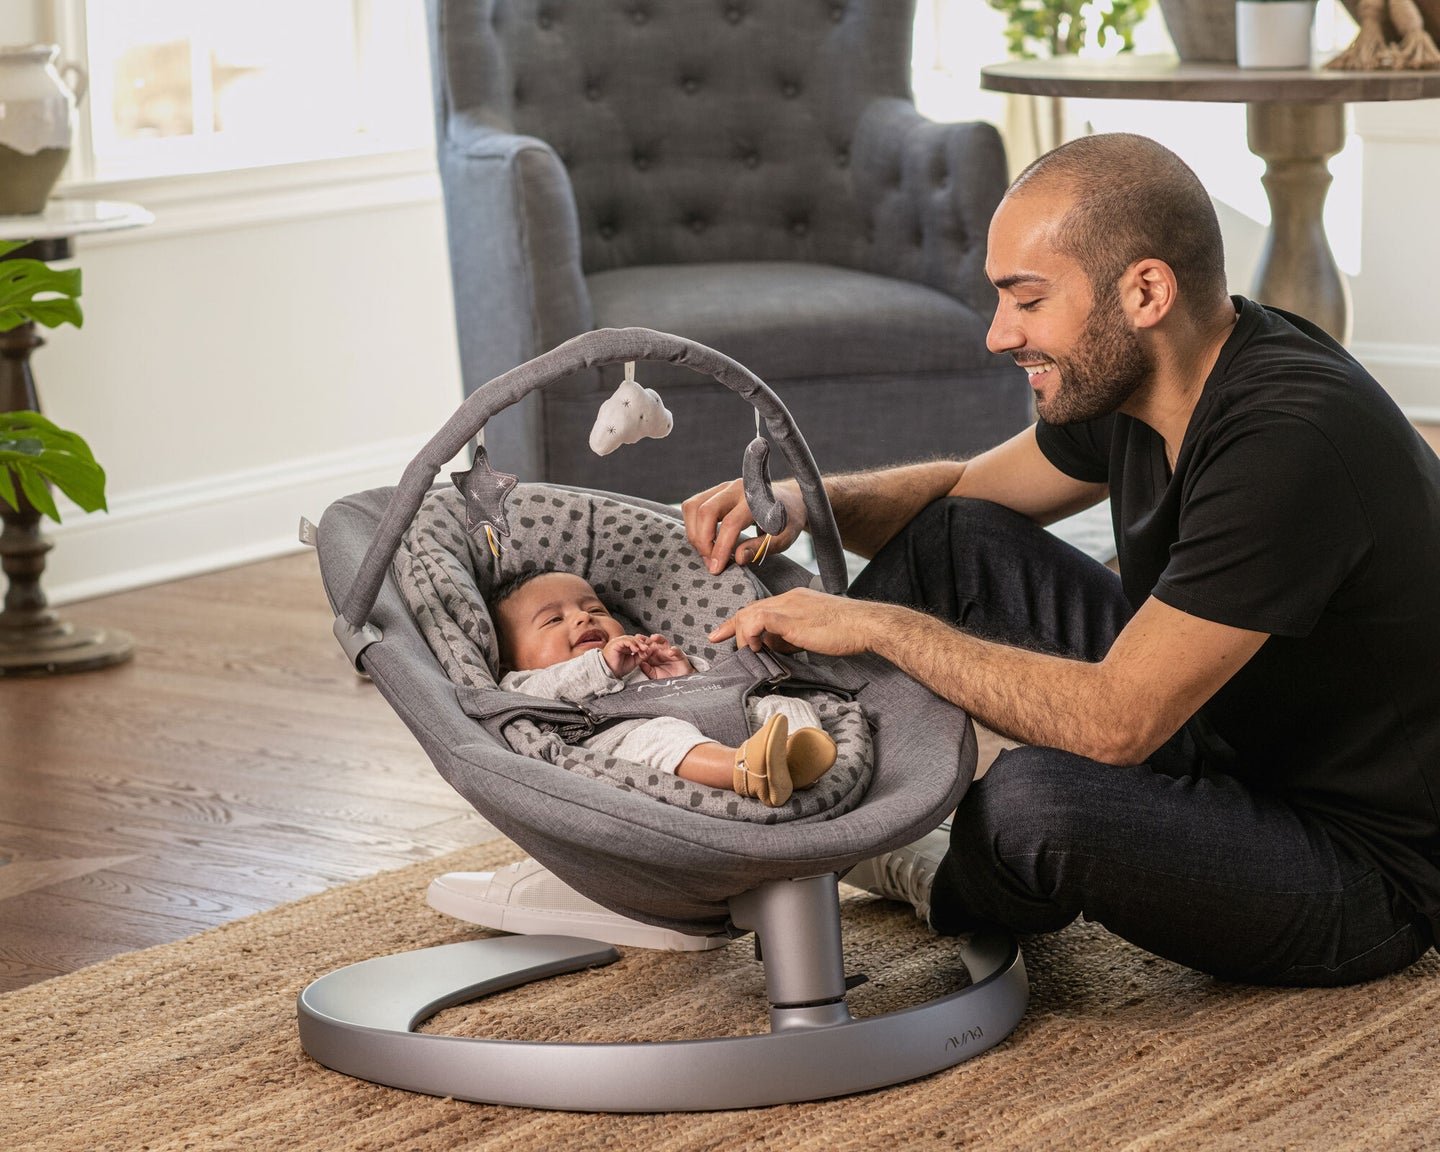 Modern Baby Gear That’s Still Highly Functional